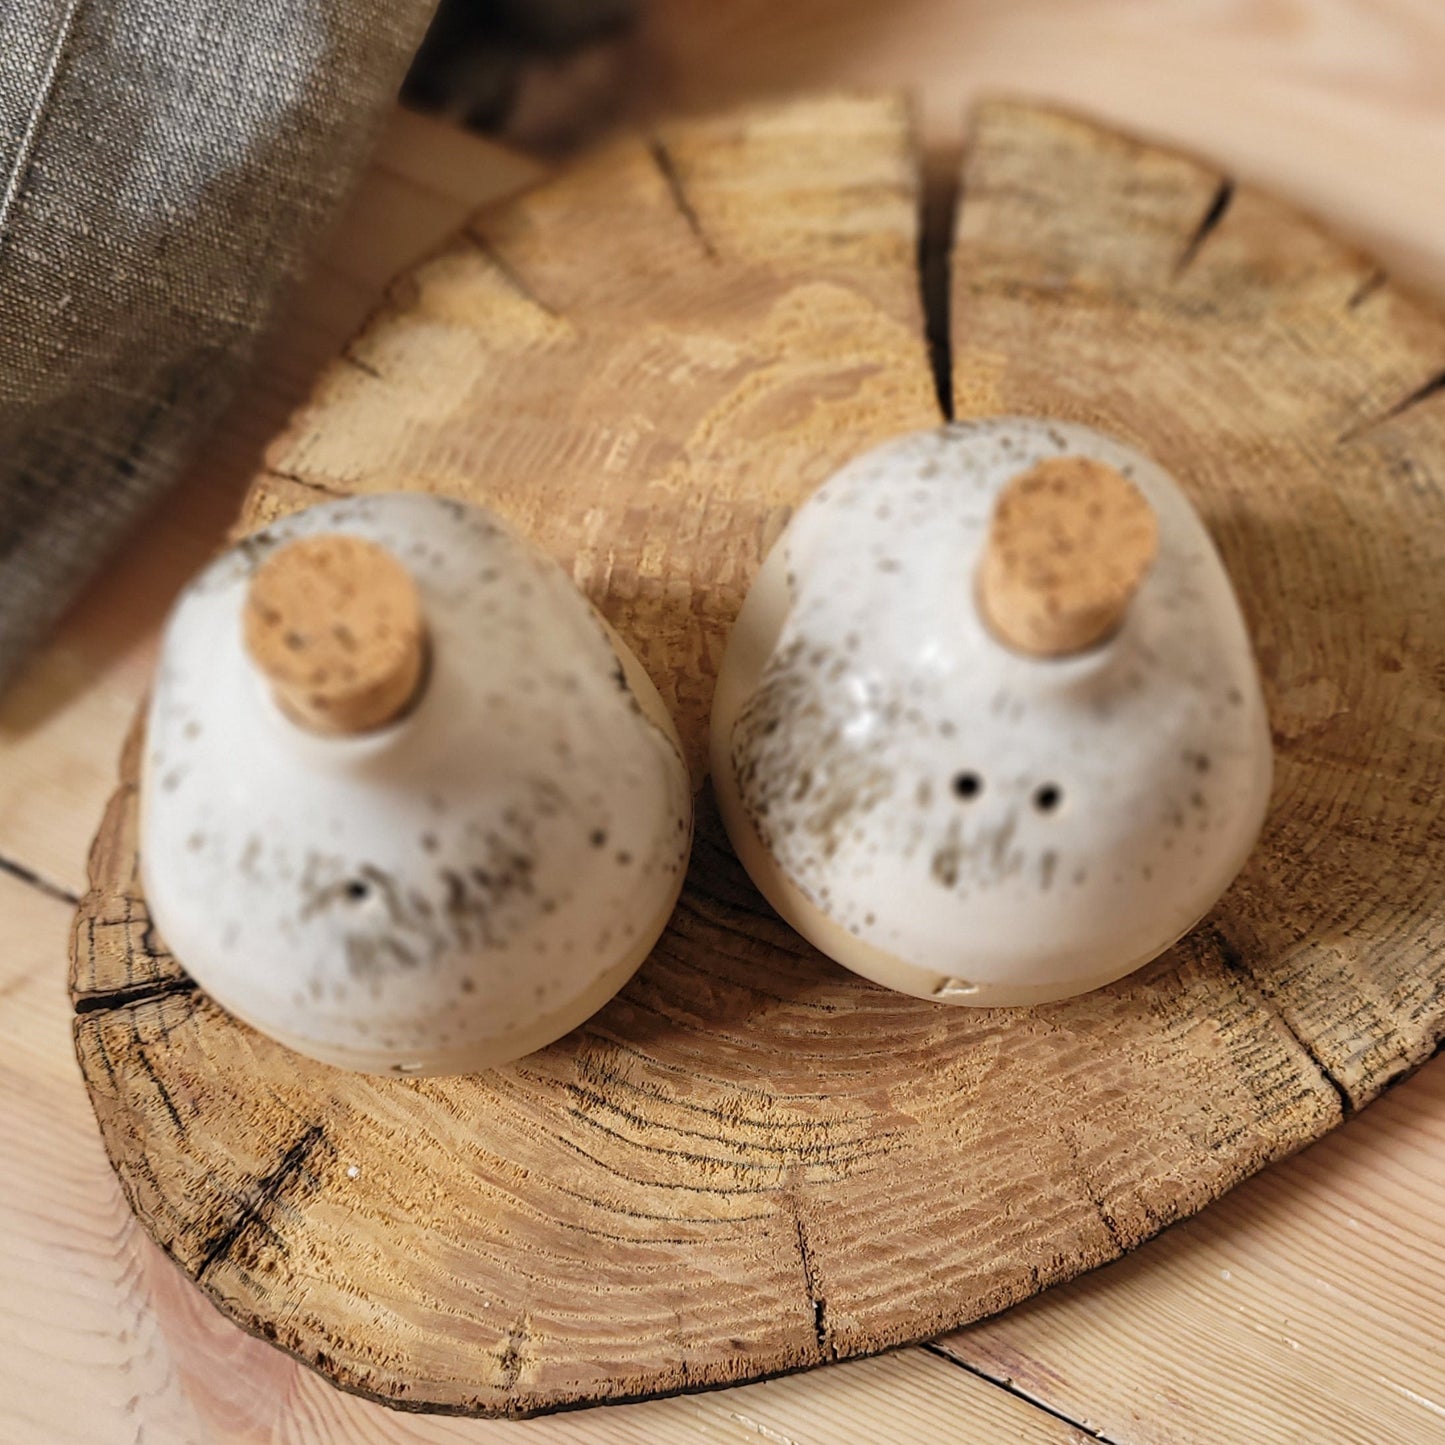 The Perfect Gift for Cooks: Set of handcrafted salt & pepper shakers. Kitchen essentials